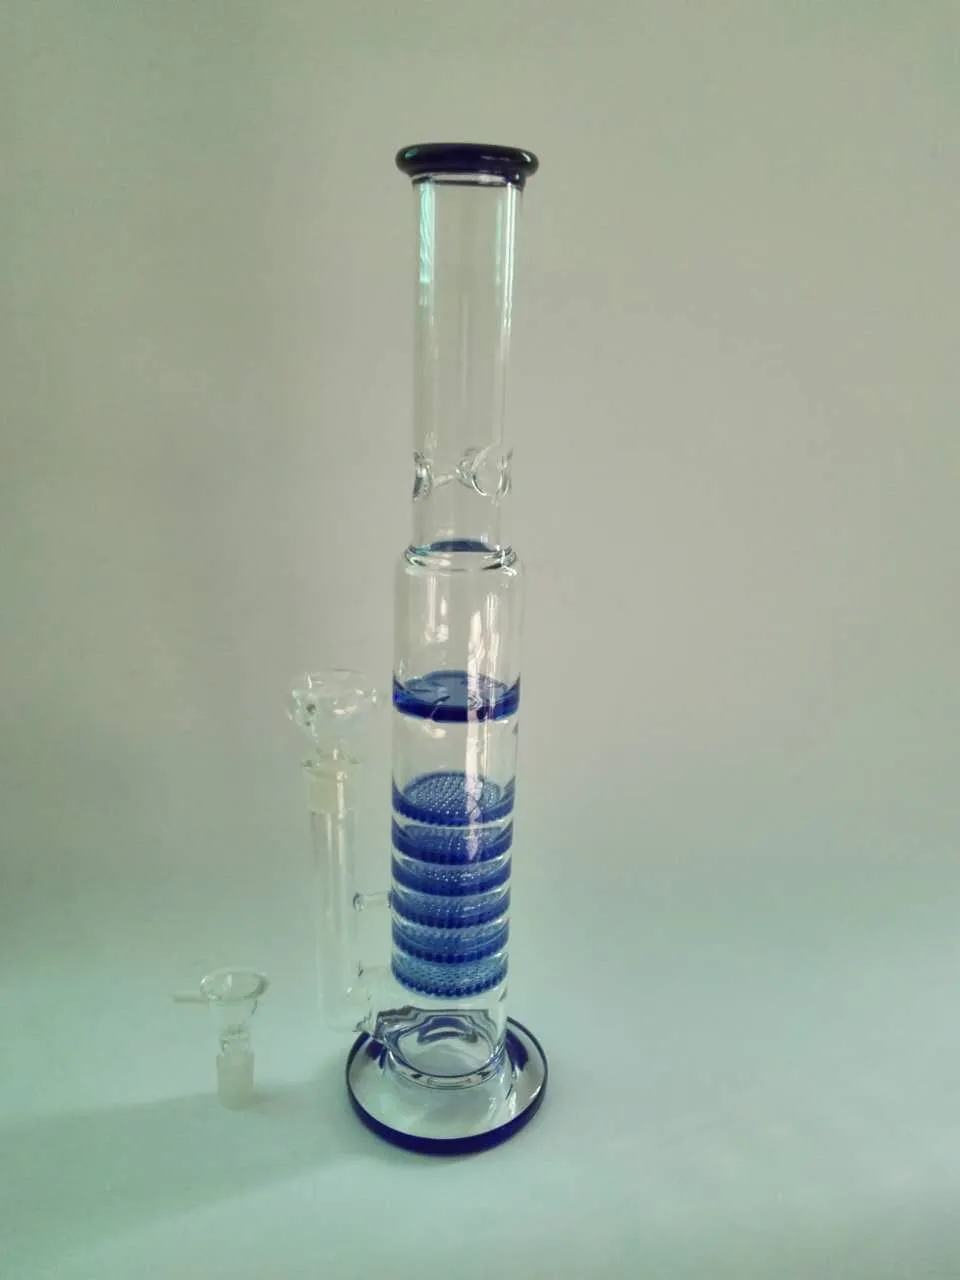 48 cm tall, blue 6 honeycomb filter glass pipe, glass bong, glass tube 6 cm in diameter, 5 mm thick, joint size:: 18 mm